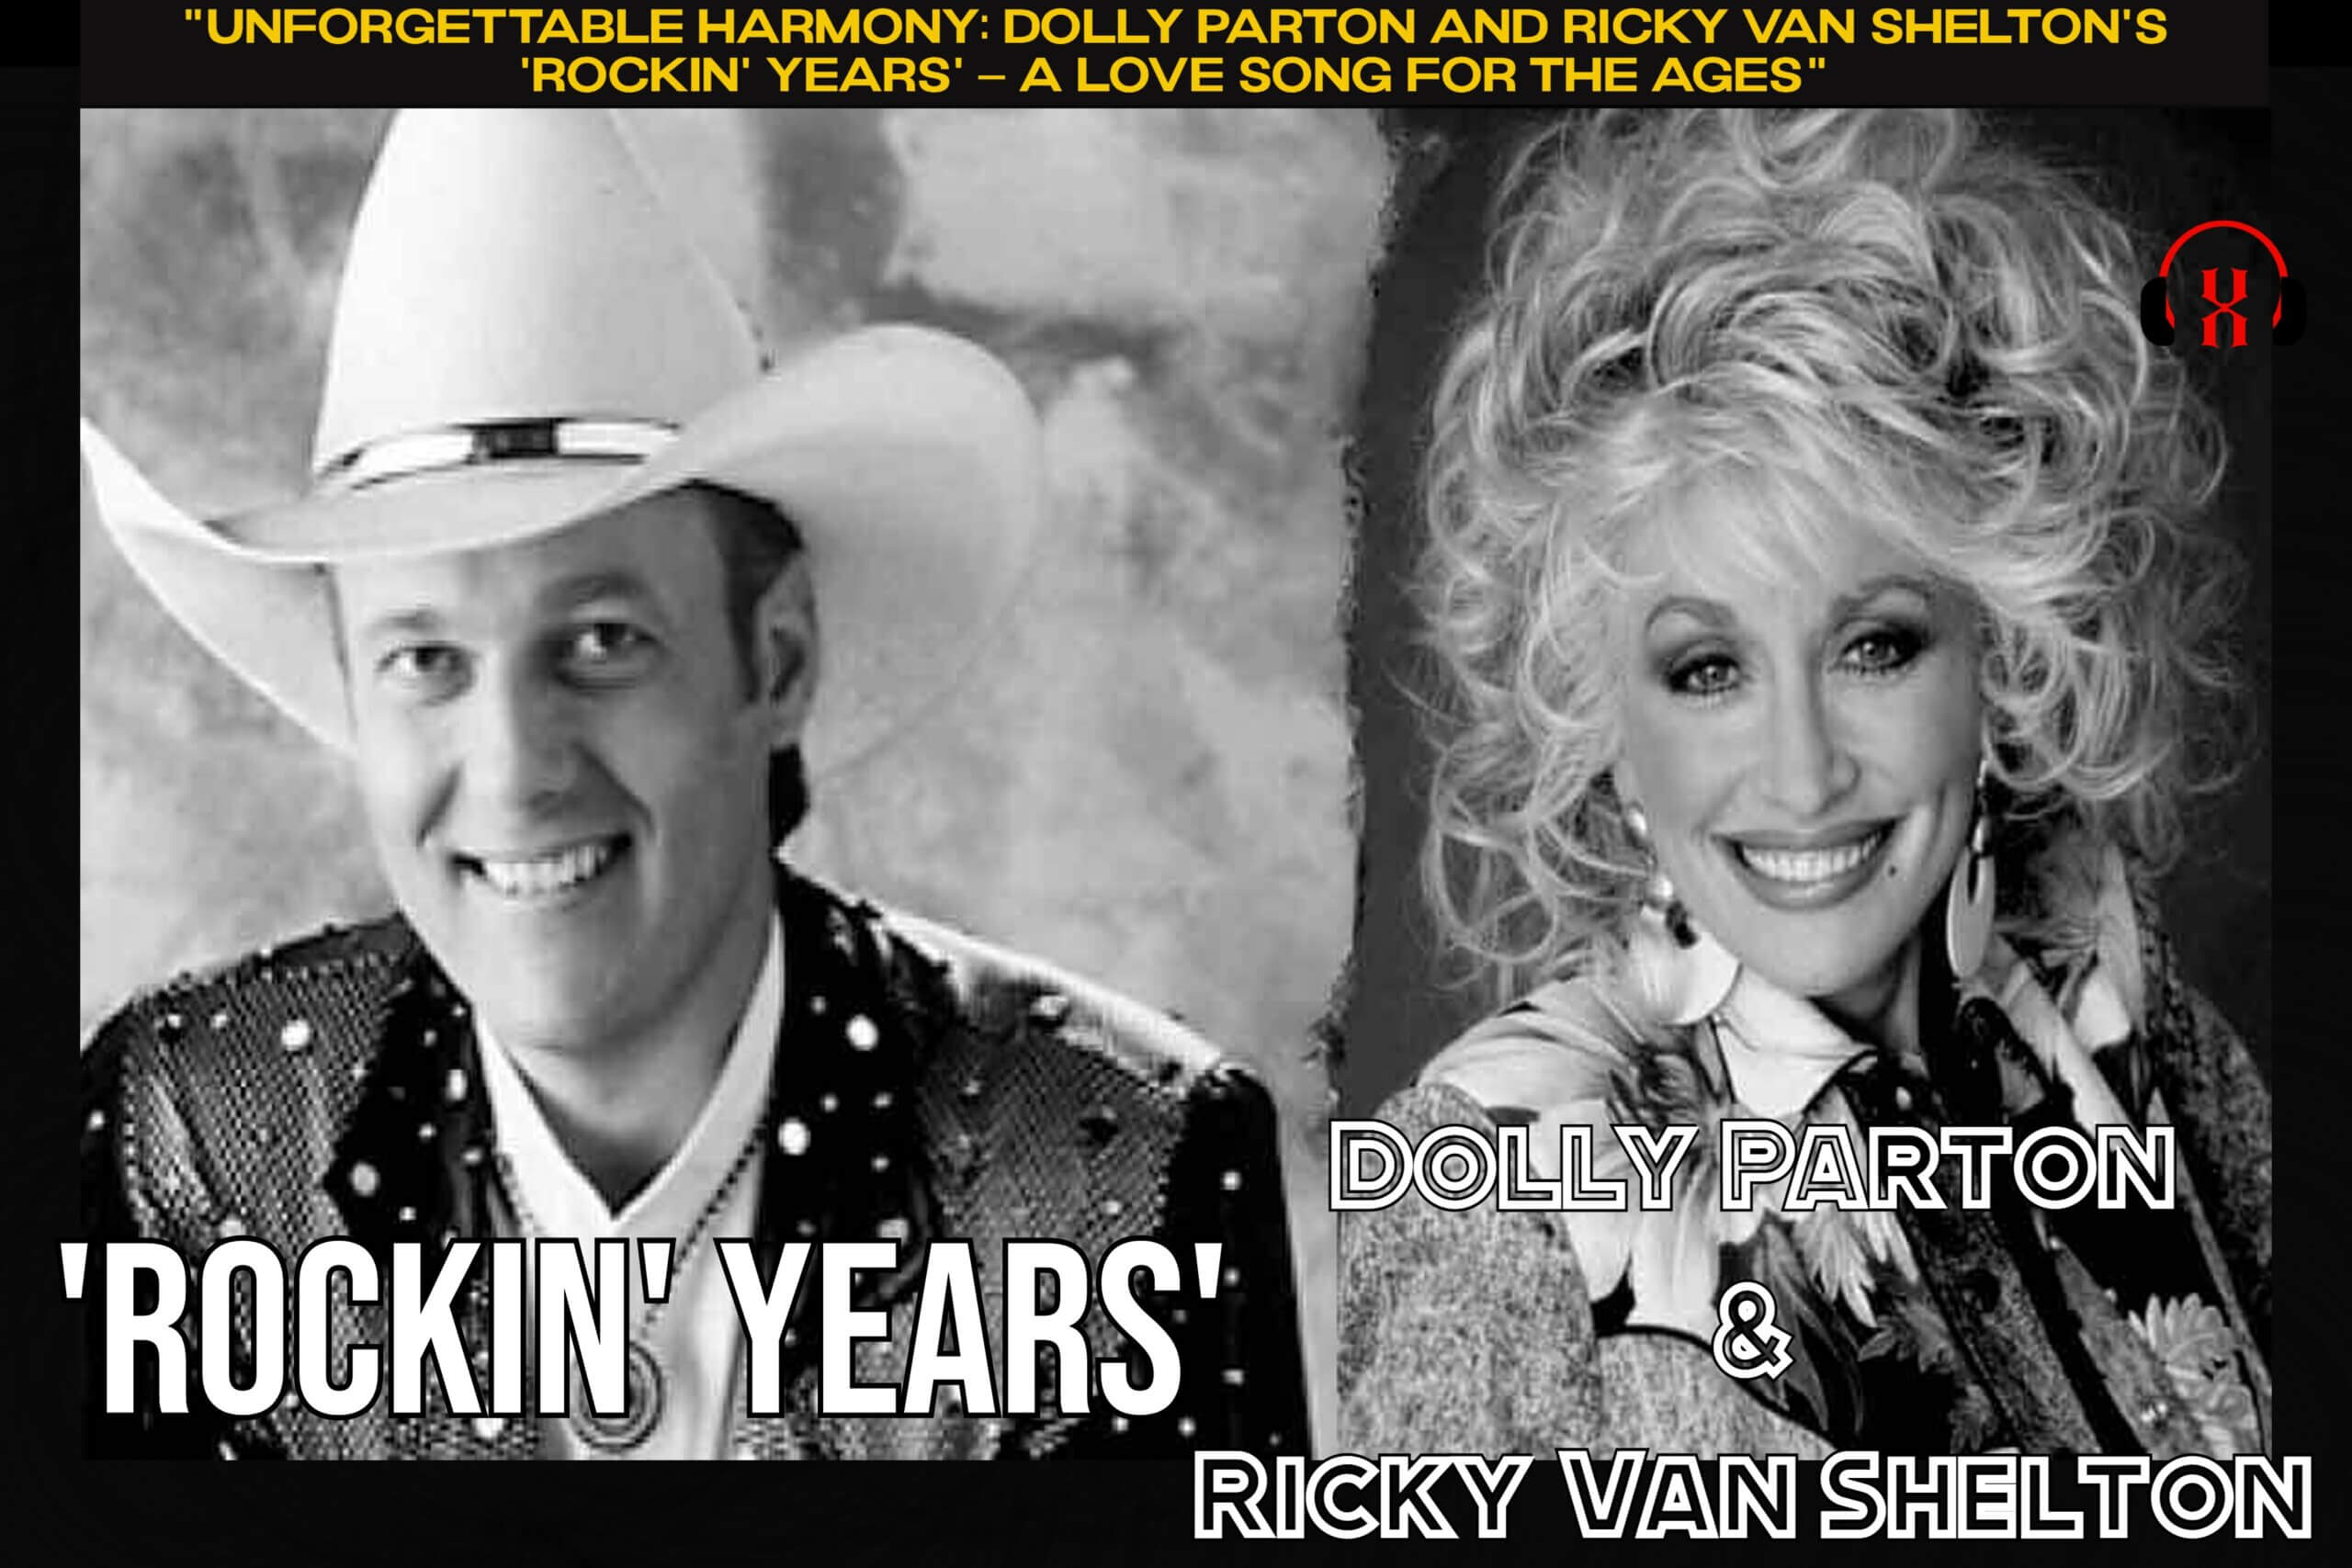 “Unforgettable Harmony: Dolly Parton and Ricky Van Shelton’s ‘Rockin’ Years’ – A Love Song for the Ages”